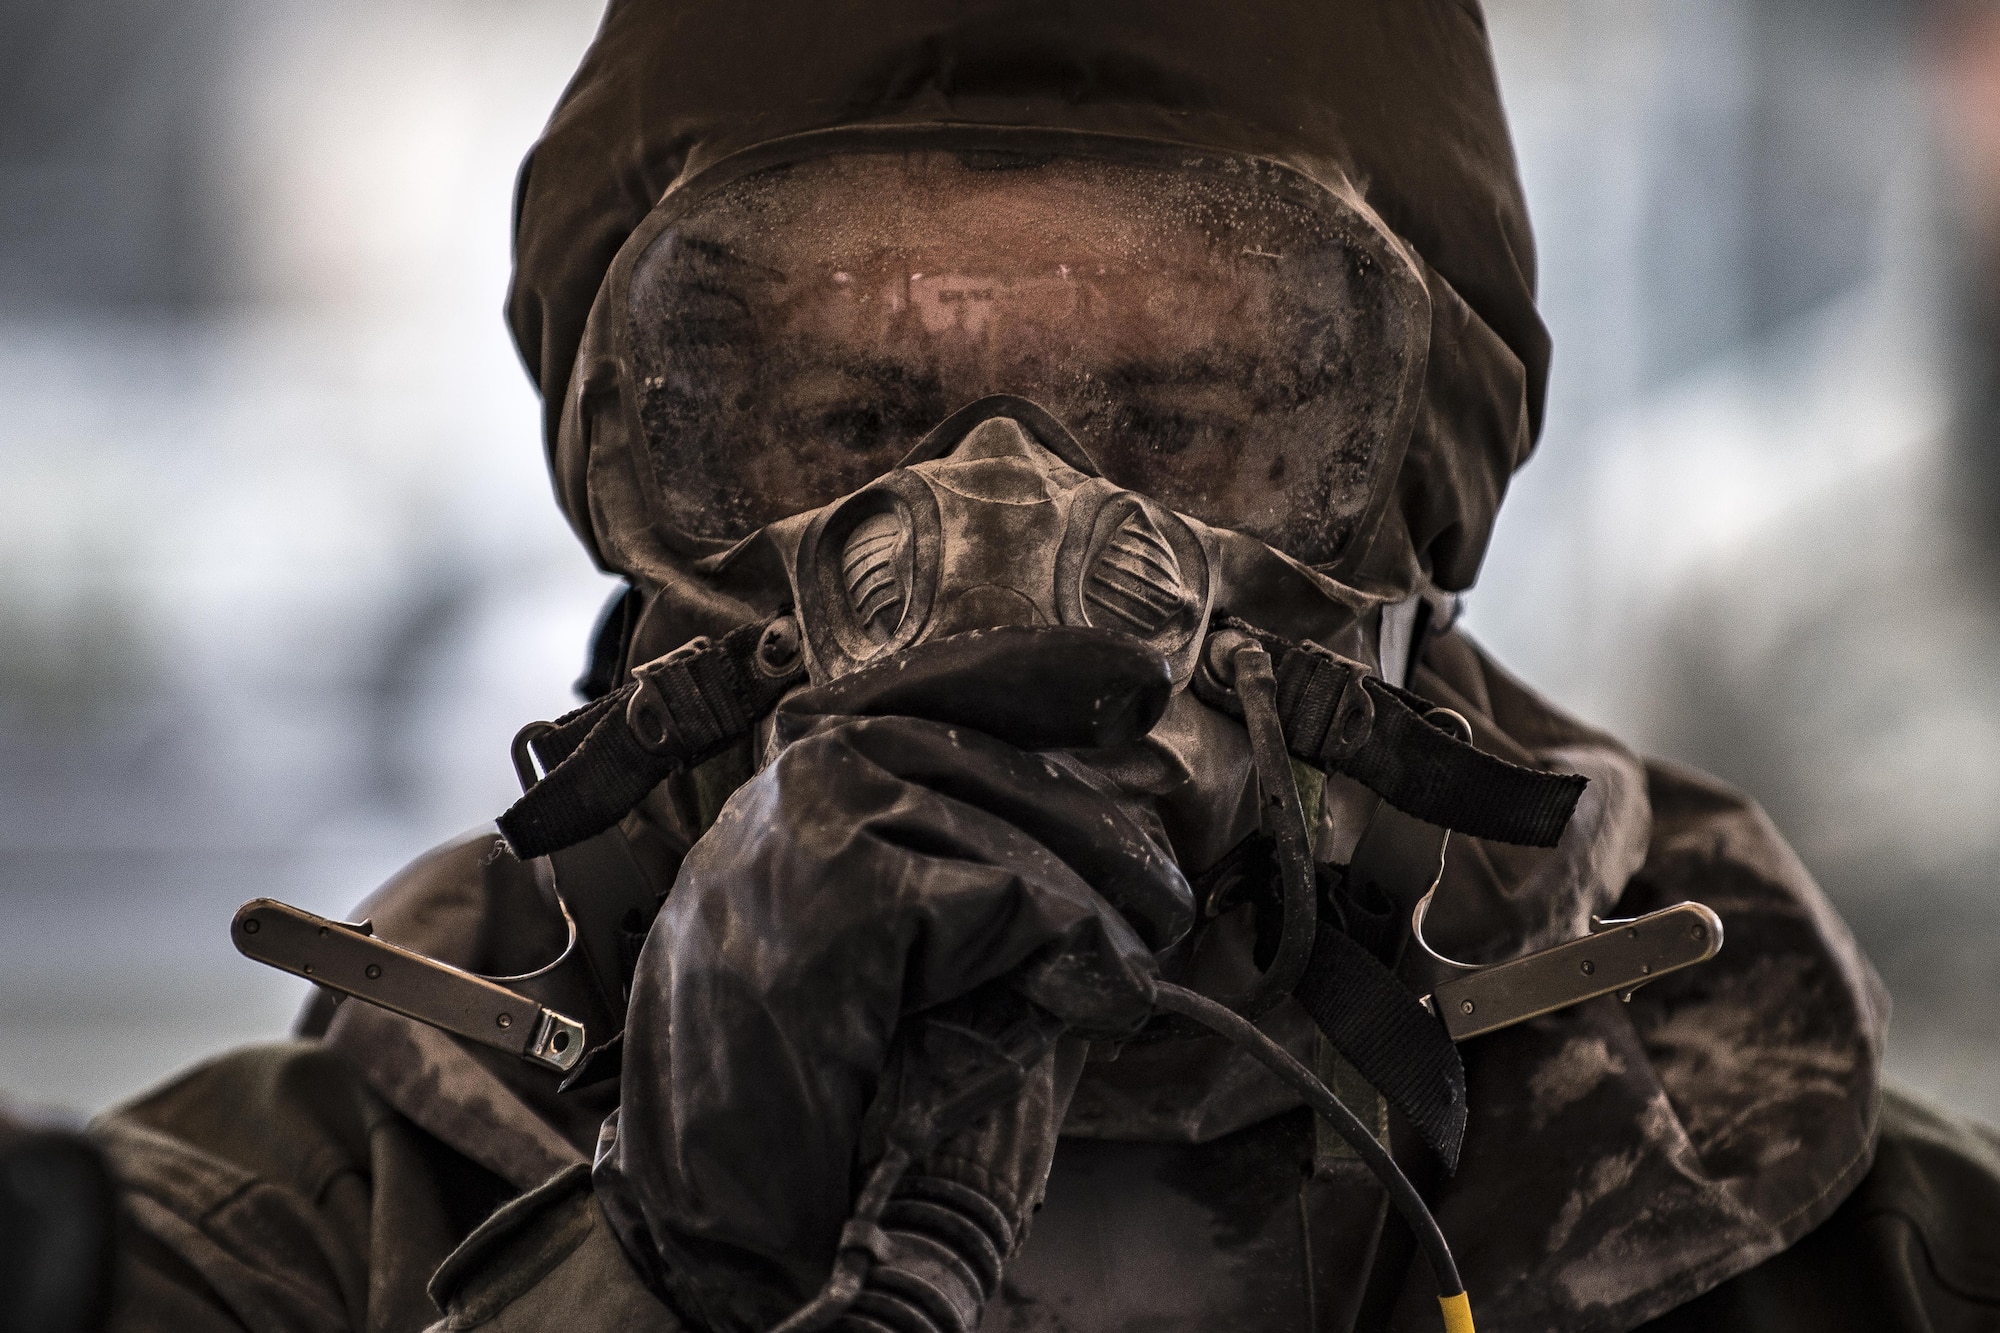 U.S. Air Force Senior Master Sgt. Bryan McCoy, Aberdeen Proving Ground Air Force Life Cycle Management Center Aircrew Flight Equipment superintendent, walks through a decontamination line during the Aircrew Contamination Mitigation course on Ramstein Air Base, Germany, Sept. 19, 2017.